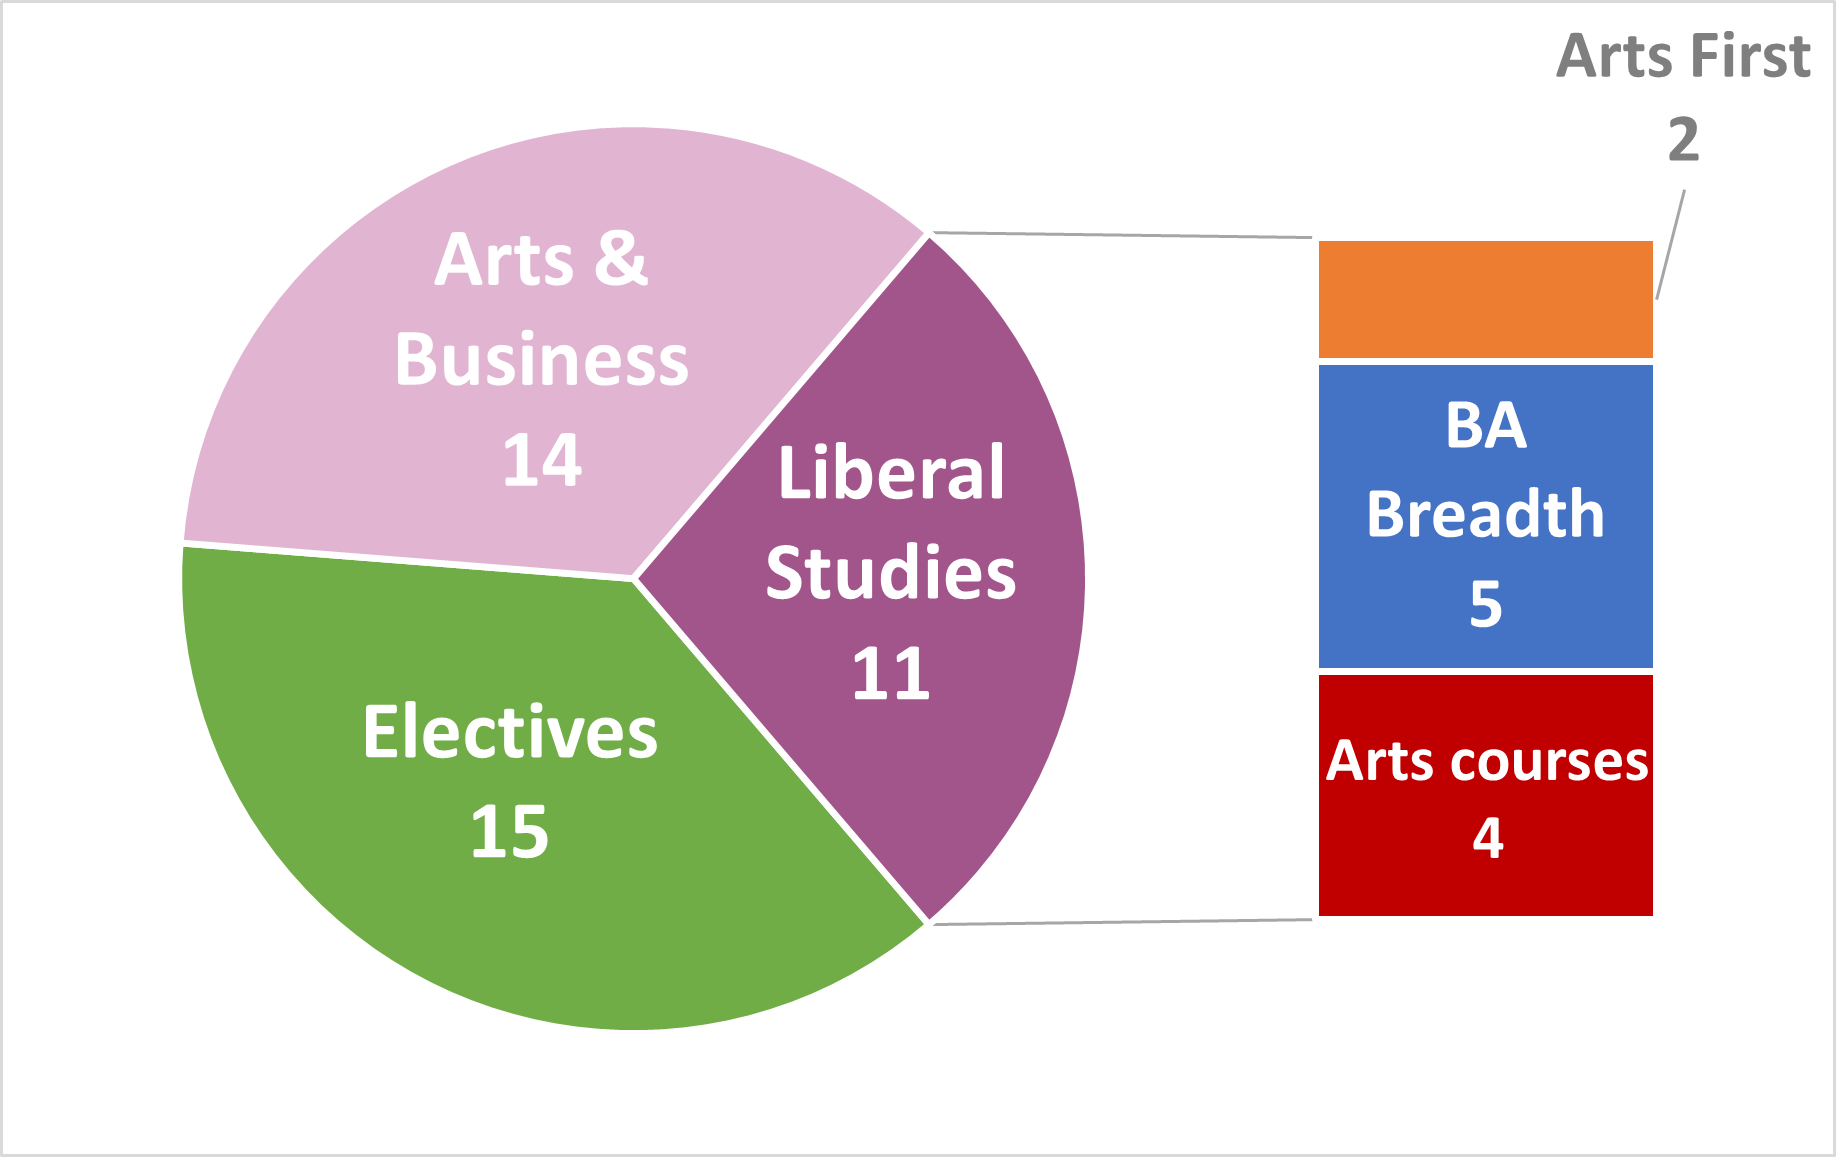 Pie graph displaying the components of an honours BA degree in liberal studies and arts and business: 15 electives, 14 arts and business courses, and 11 liberal studies courses made up of 2 Arts First courses, 5 BA Breadth courses, and 4 unrestricted Arts courses.